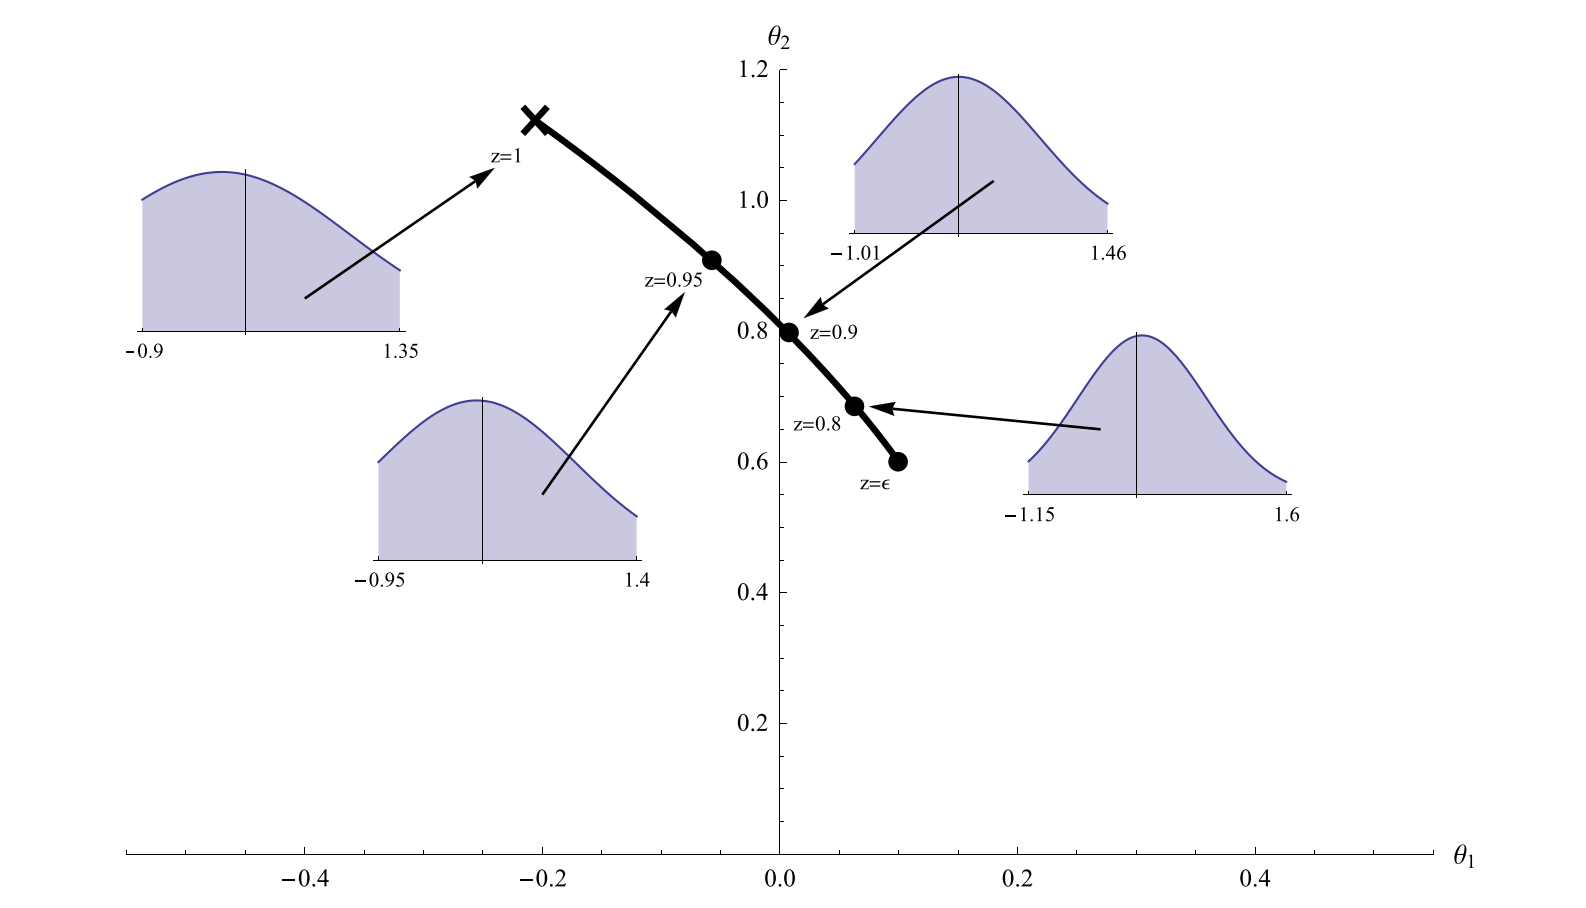 A truncation path for a normal distribution